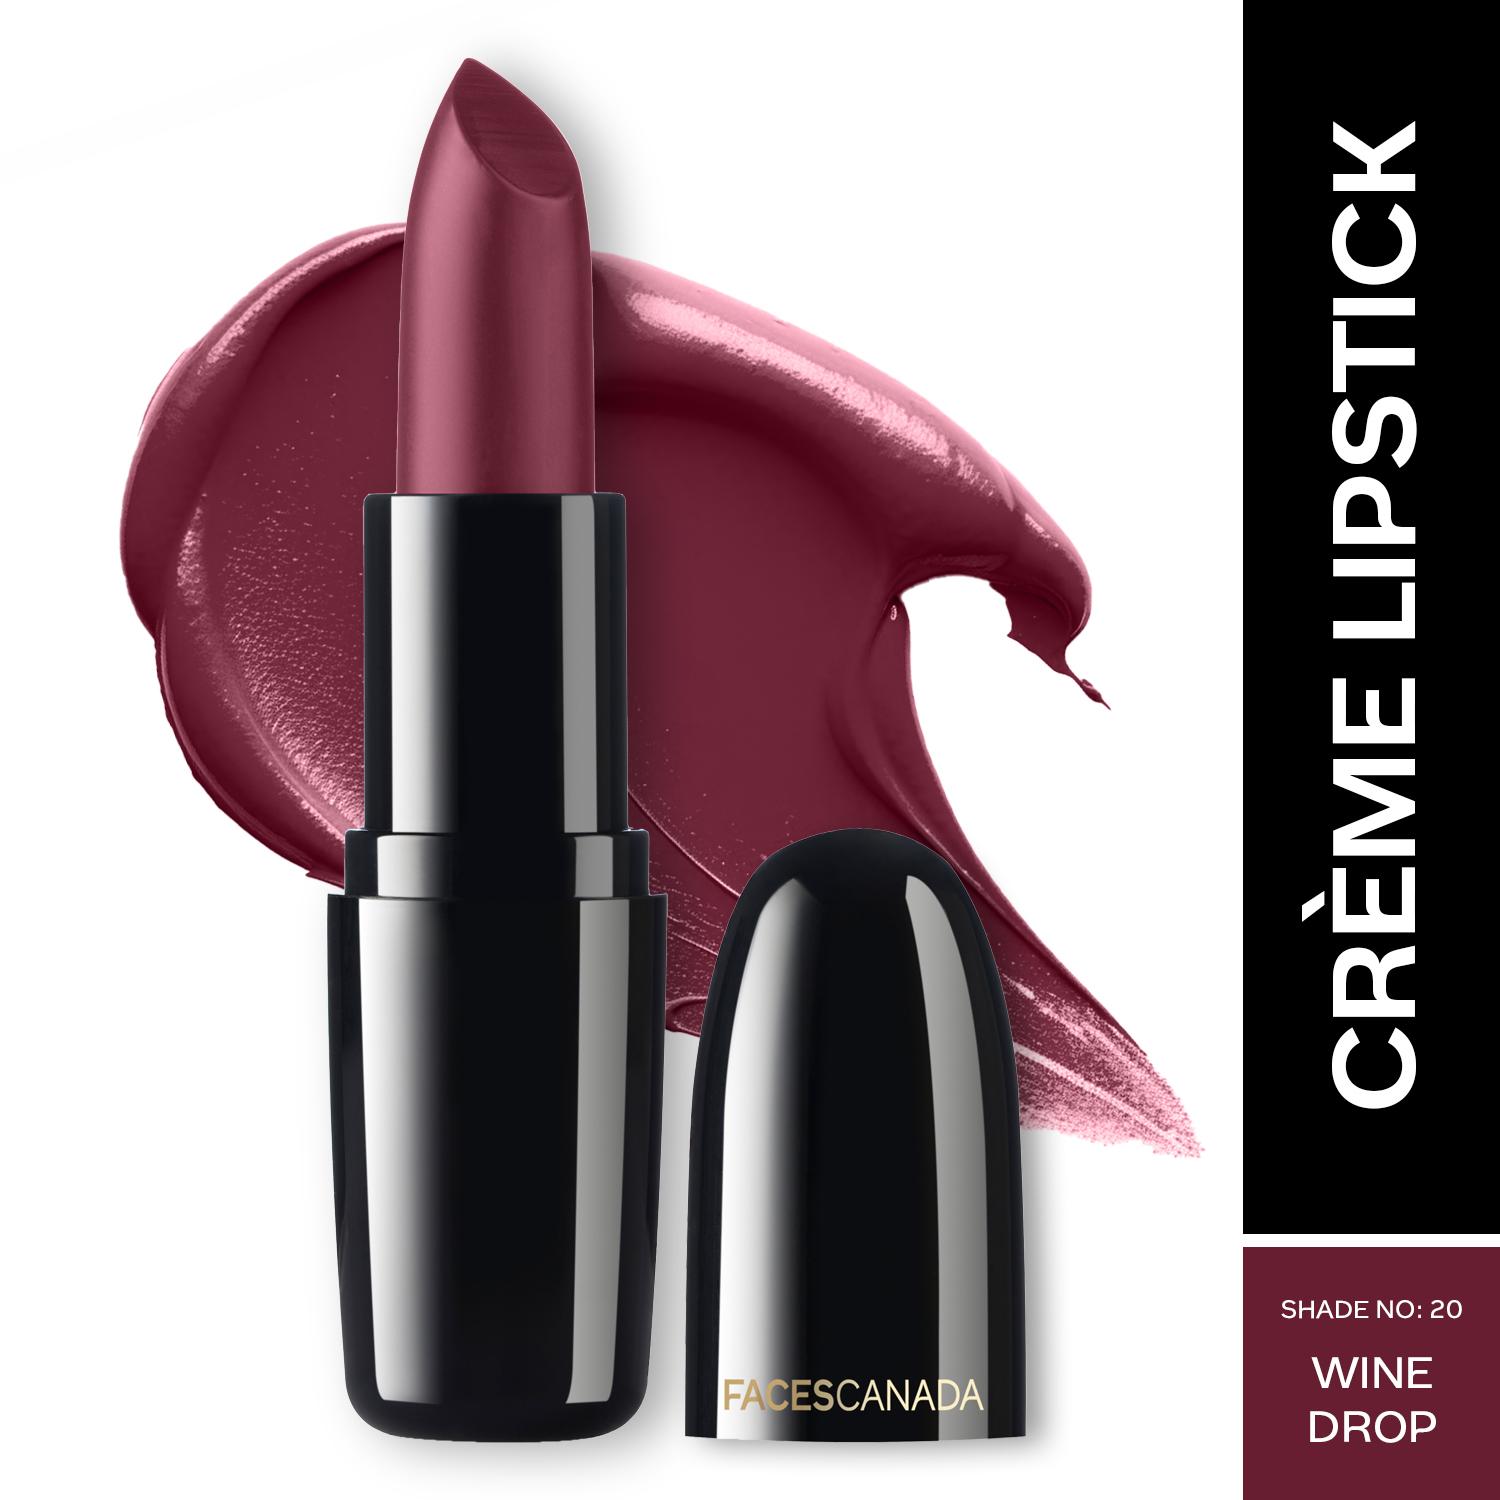 Faces Canada | Faces Canada Weightless Creme Finish Lipstick, Creamy Finish, Hydrated Lips - Wine Drop 20 (4 g)